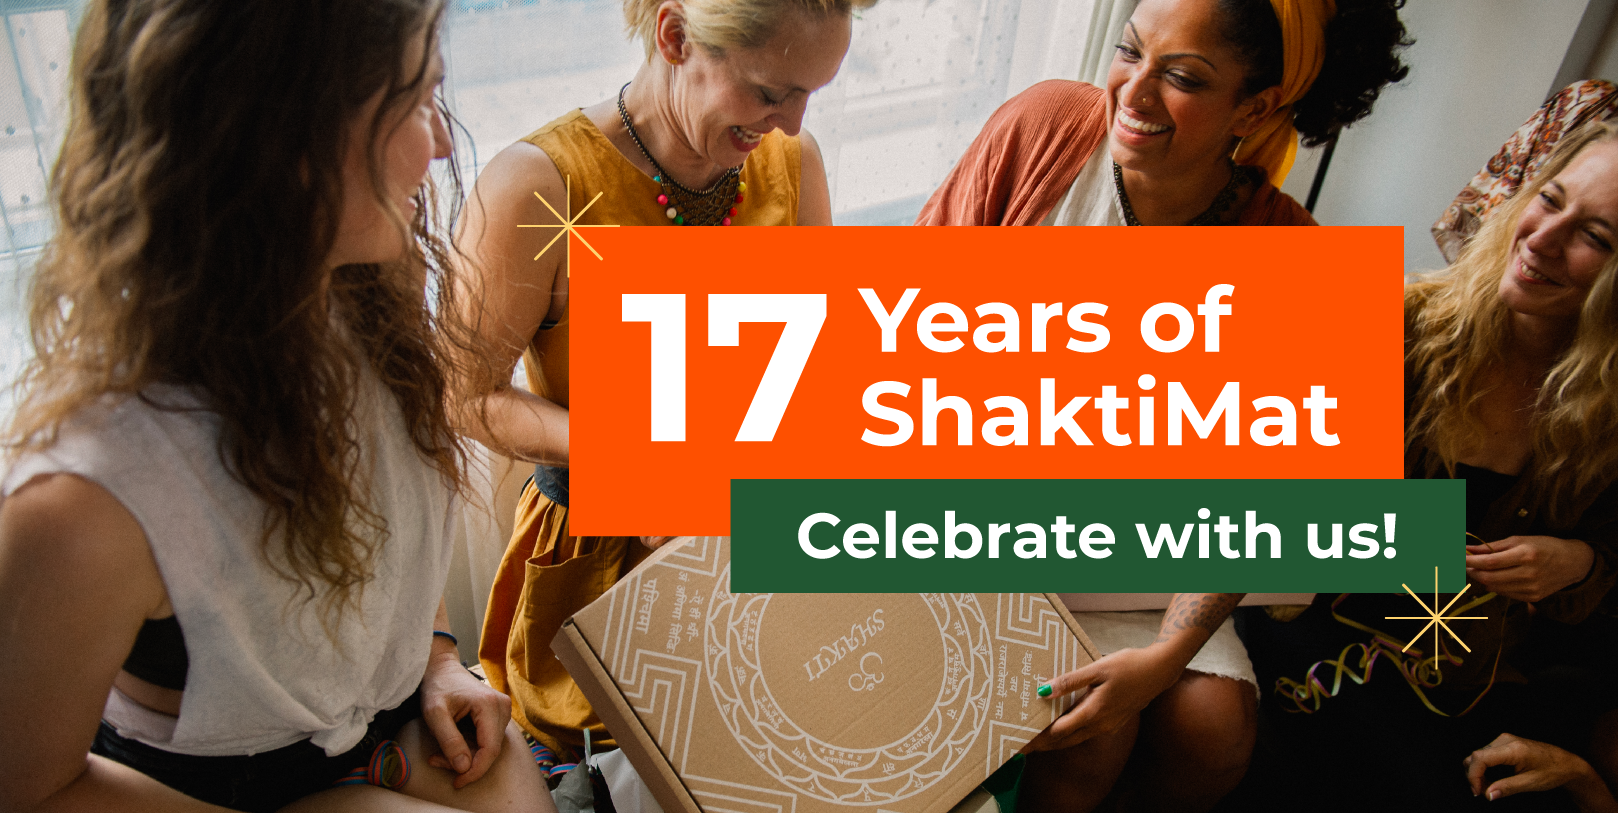 Top relaxation for 17 years - An interview with the founders of ShaktiMat